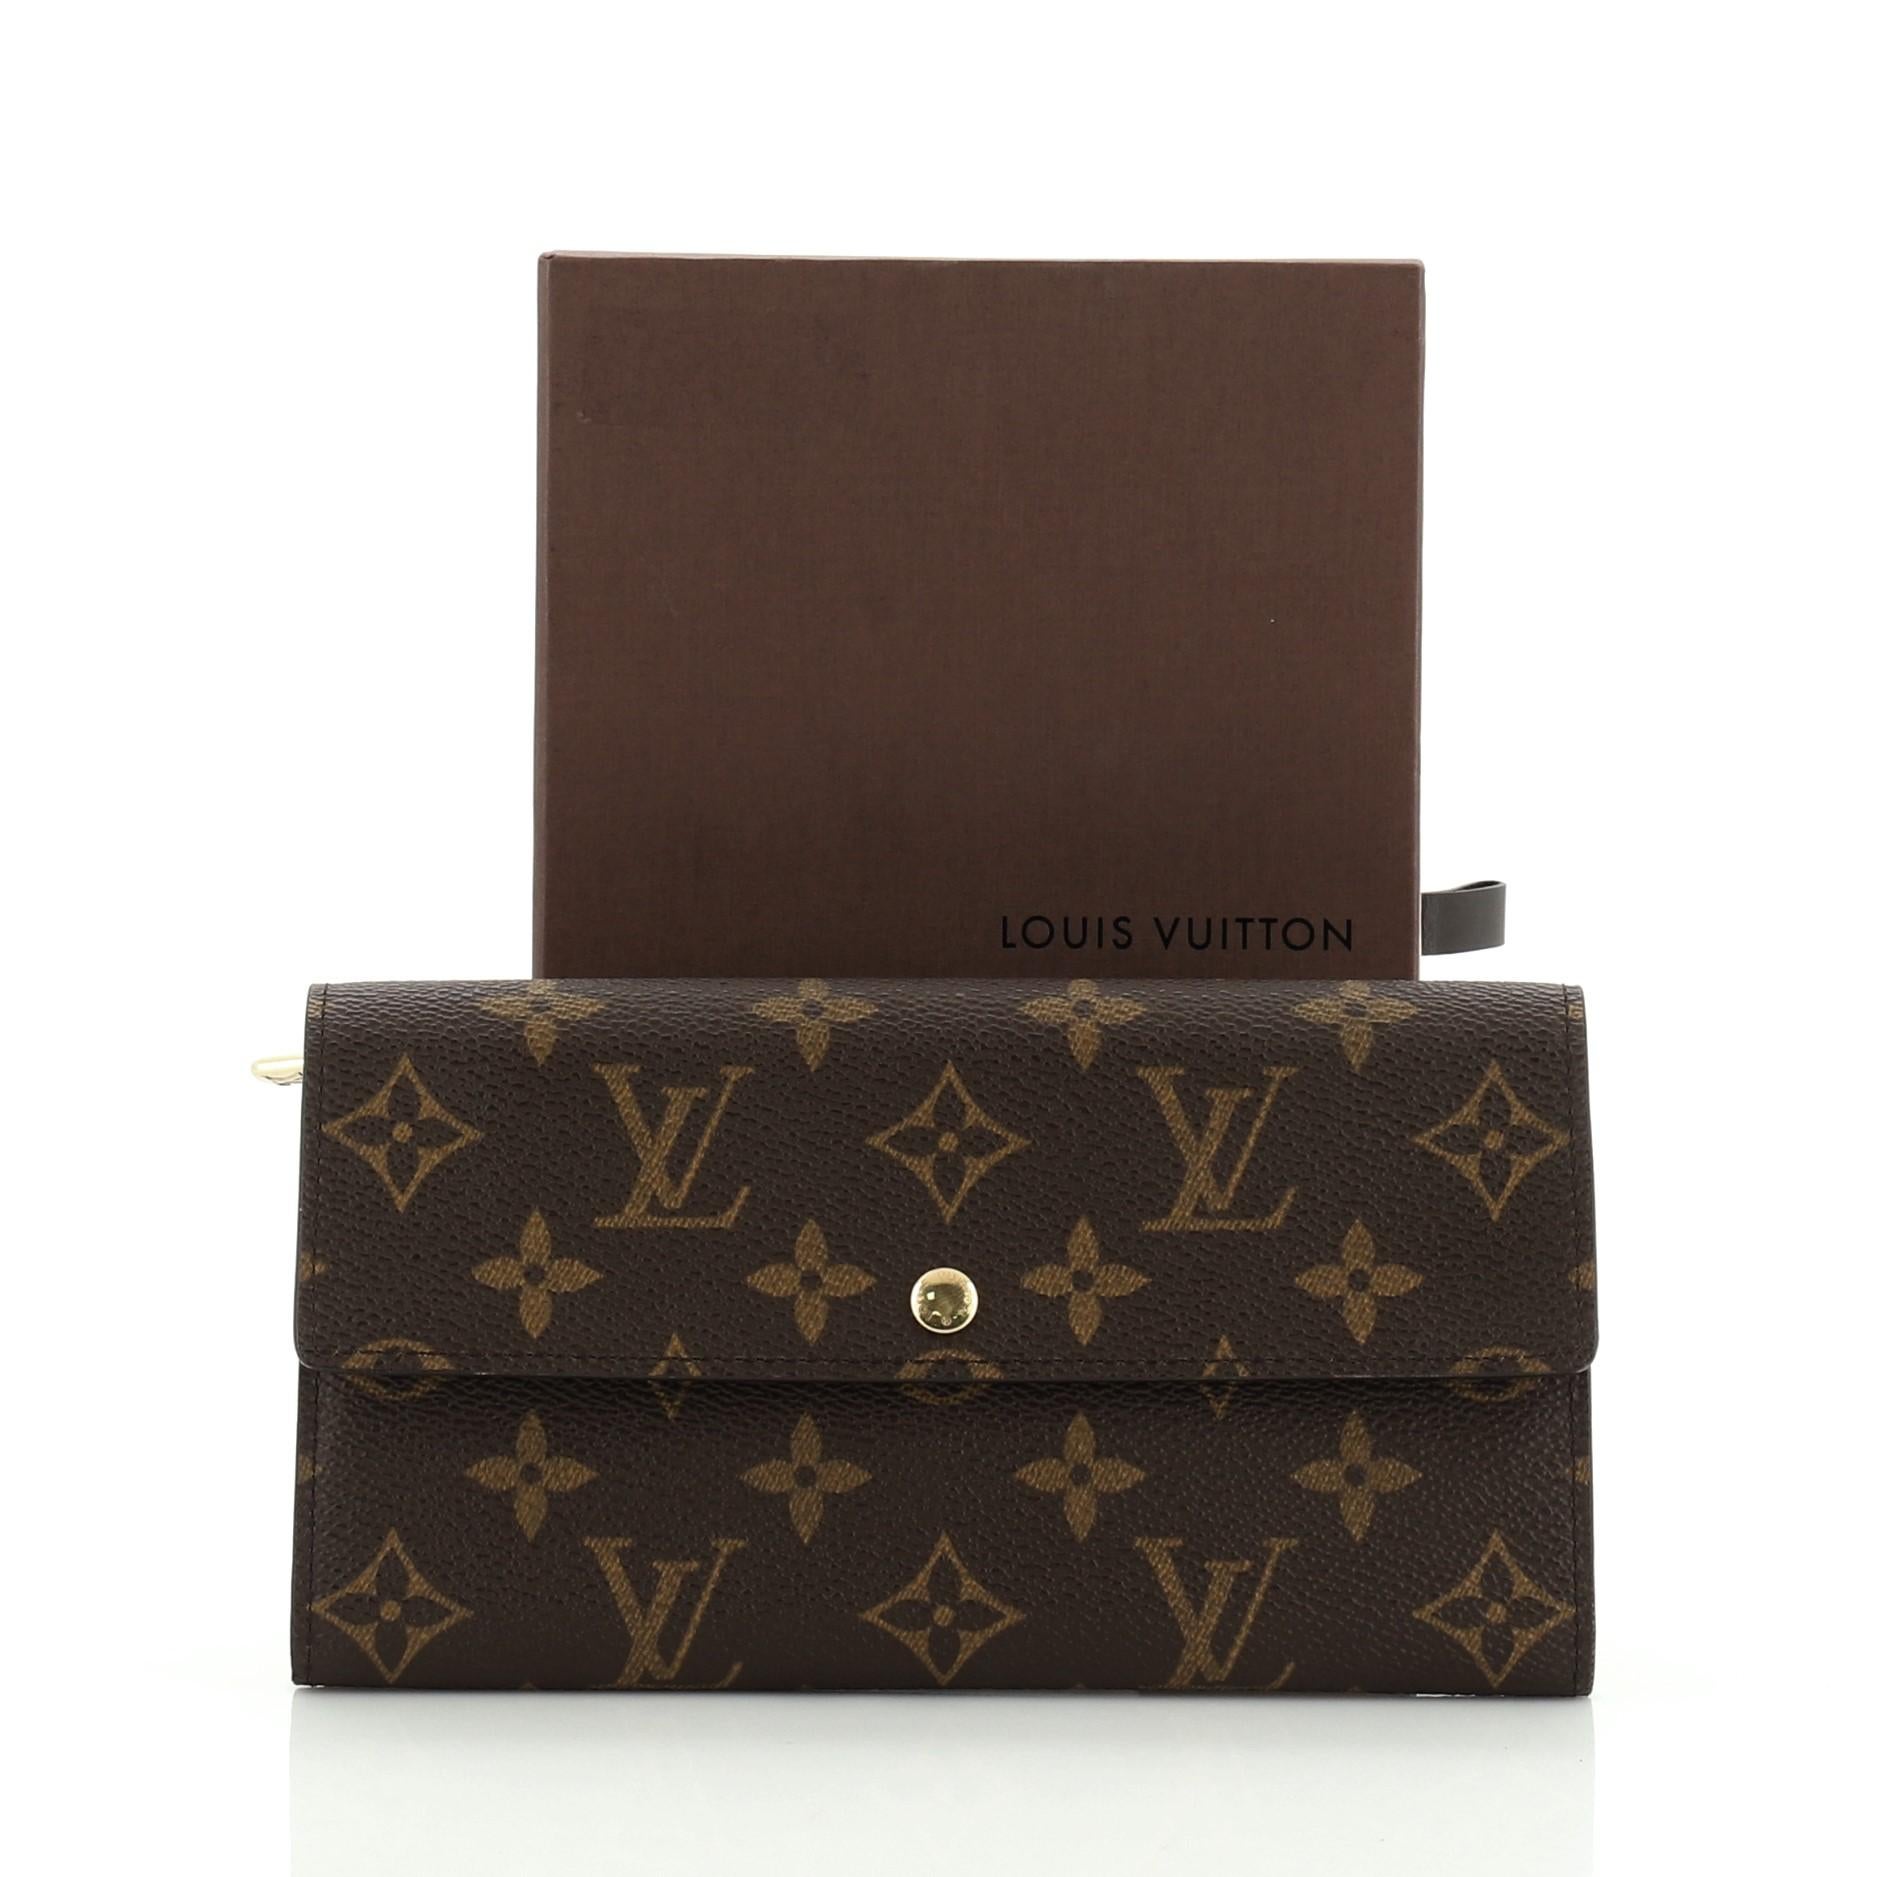 This Louis Vuitton Sarah Wallet Monogram Canvas is an everyday piece with compact design offering multiple practical features. Crafted from brown monogram coated canvas, it features frontal flap and gold-tone hardware. Its snap closure opens to a